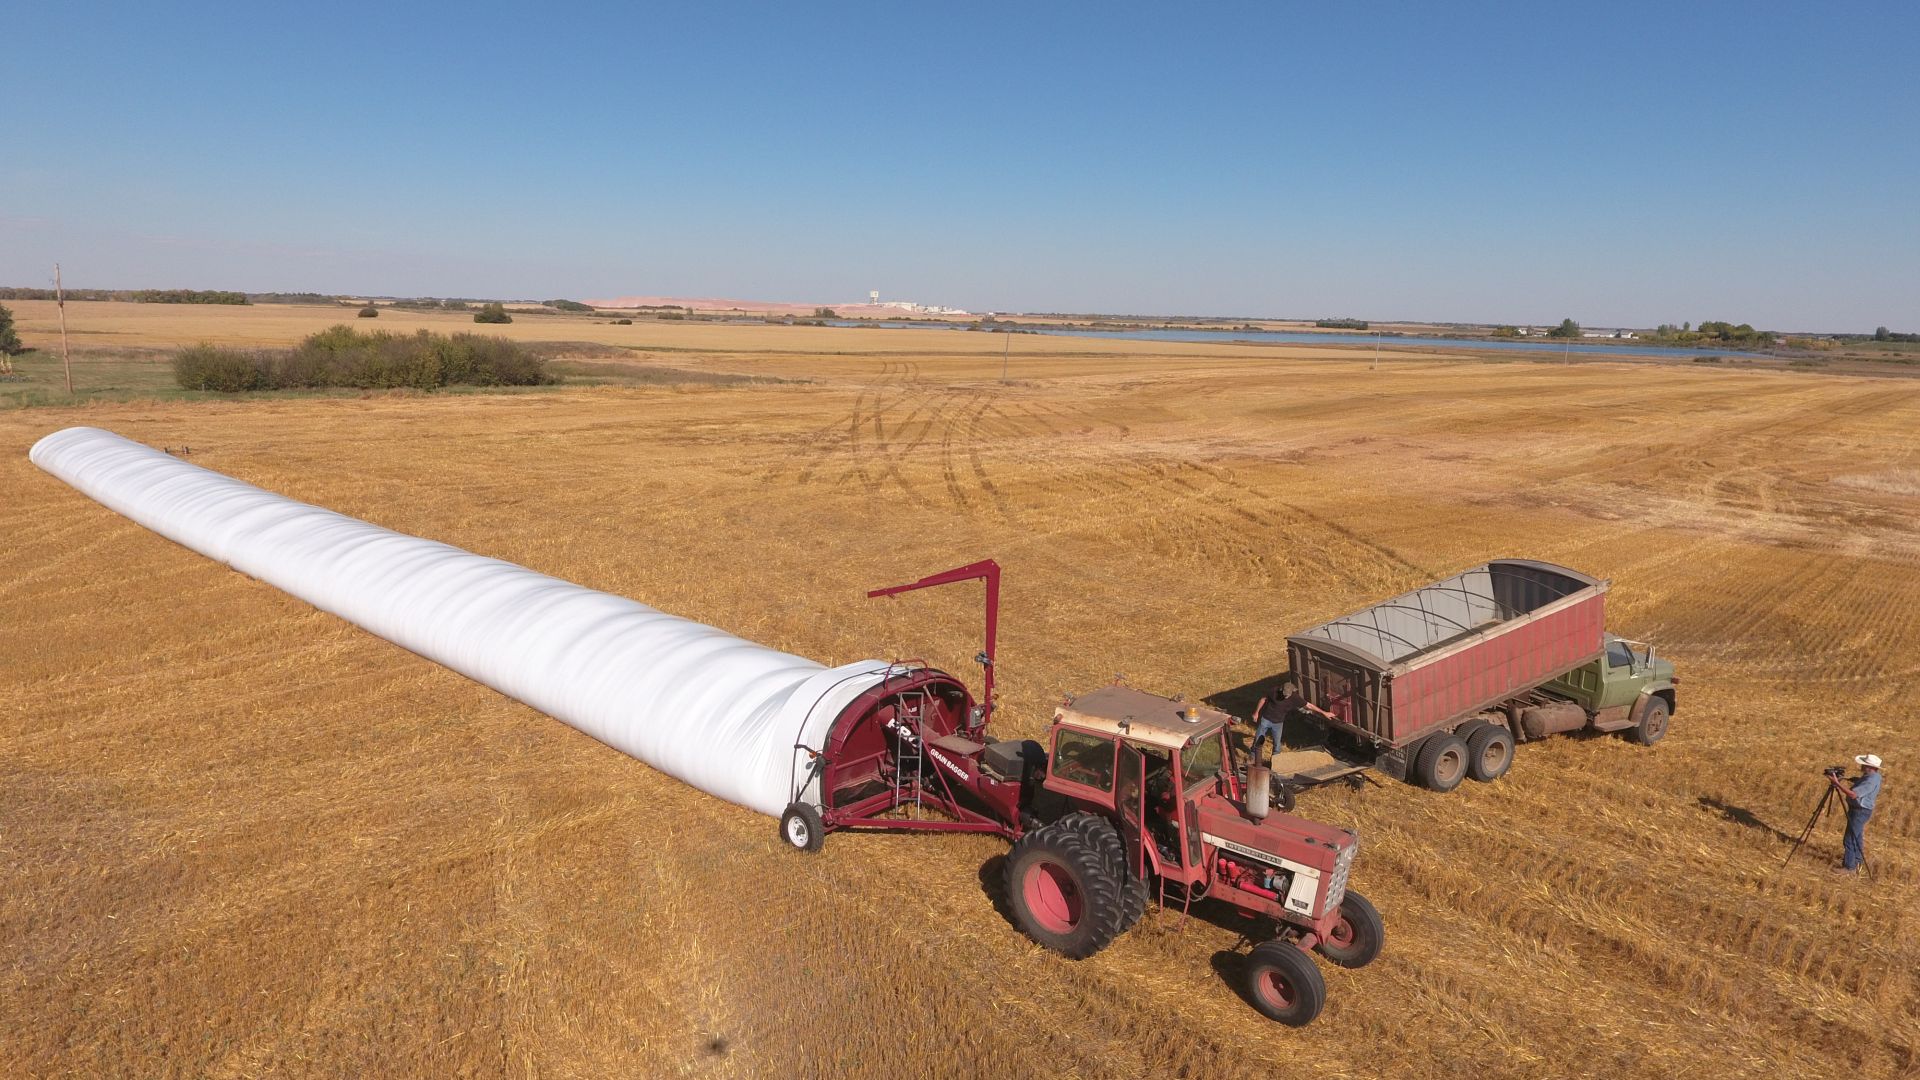 Aerial view of grain bagger in the field